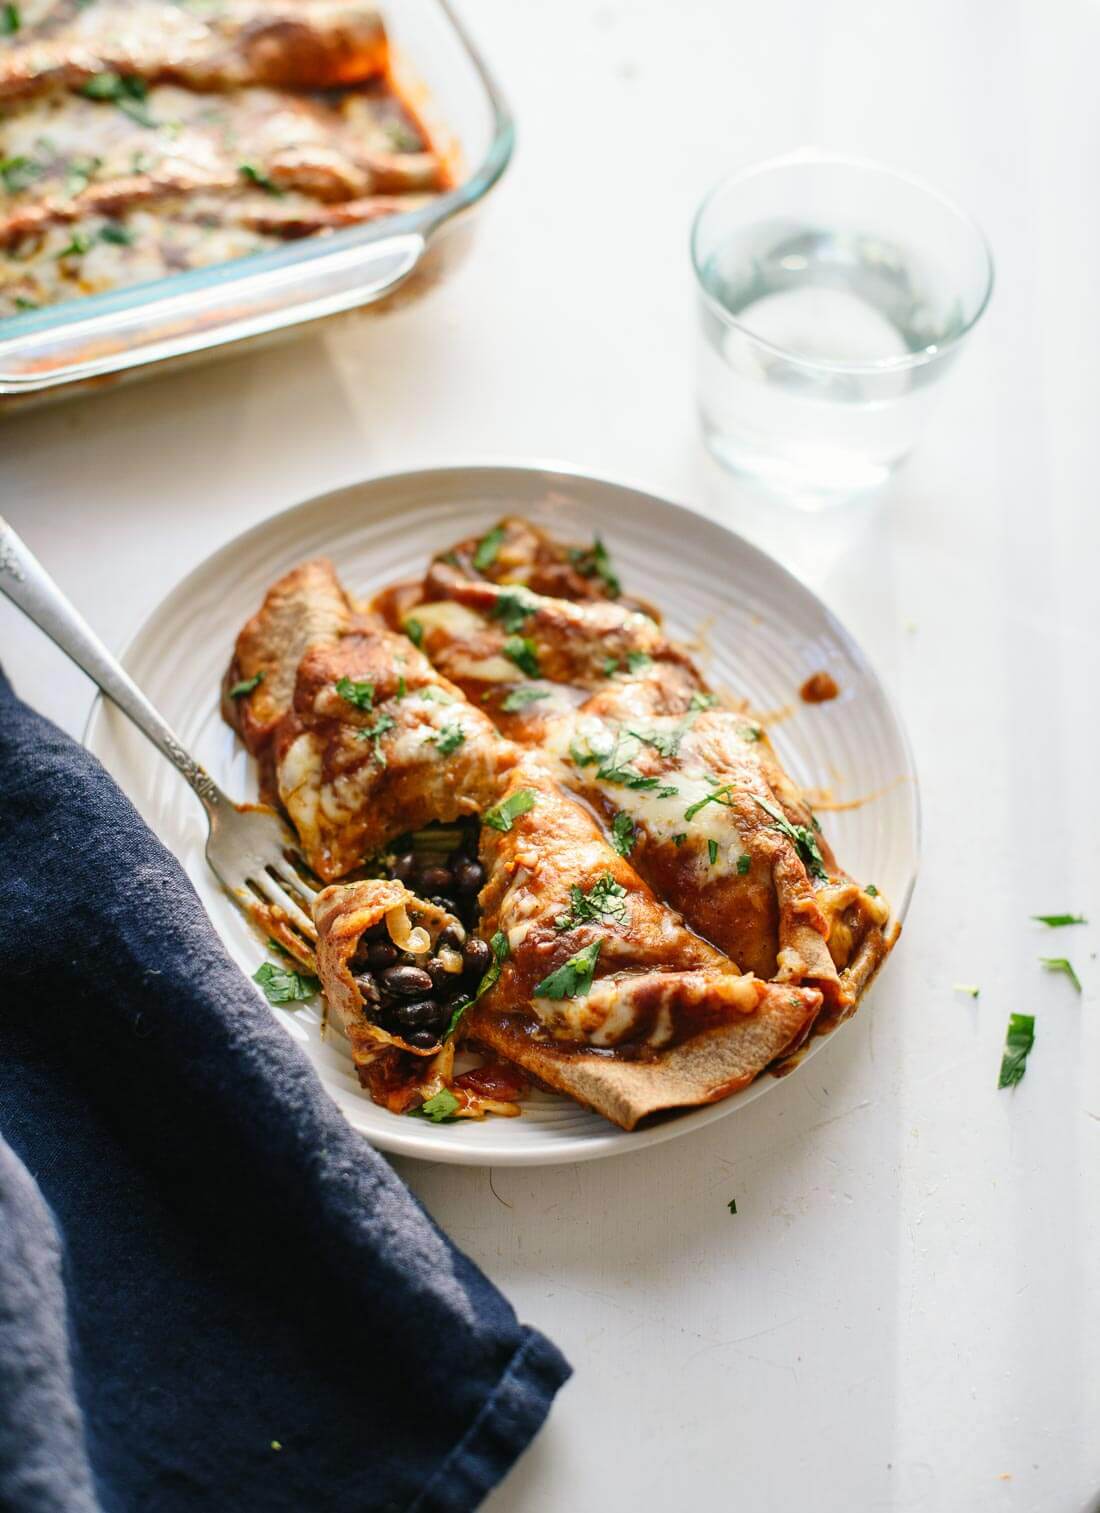 Delicious vegetable enchiladas with black beans and homemade red sauce - cookieandkate.com